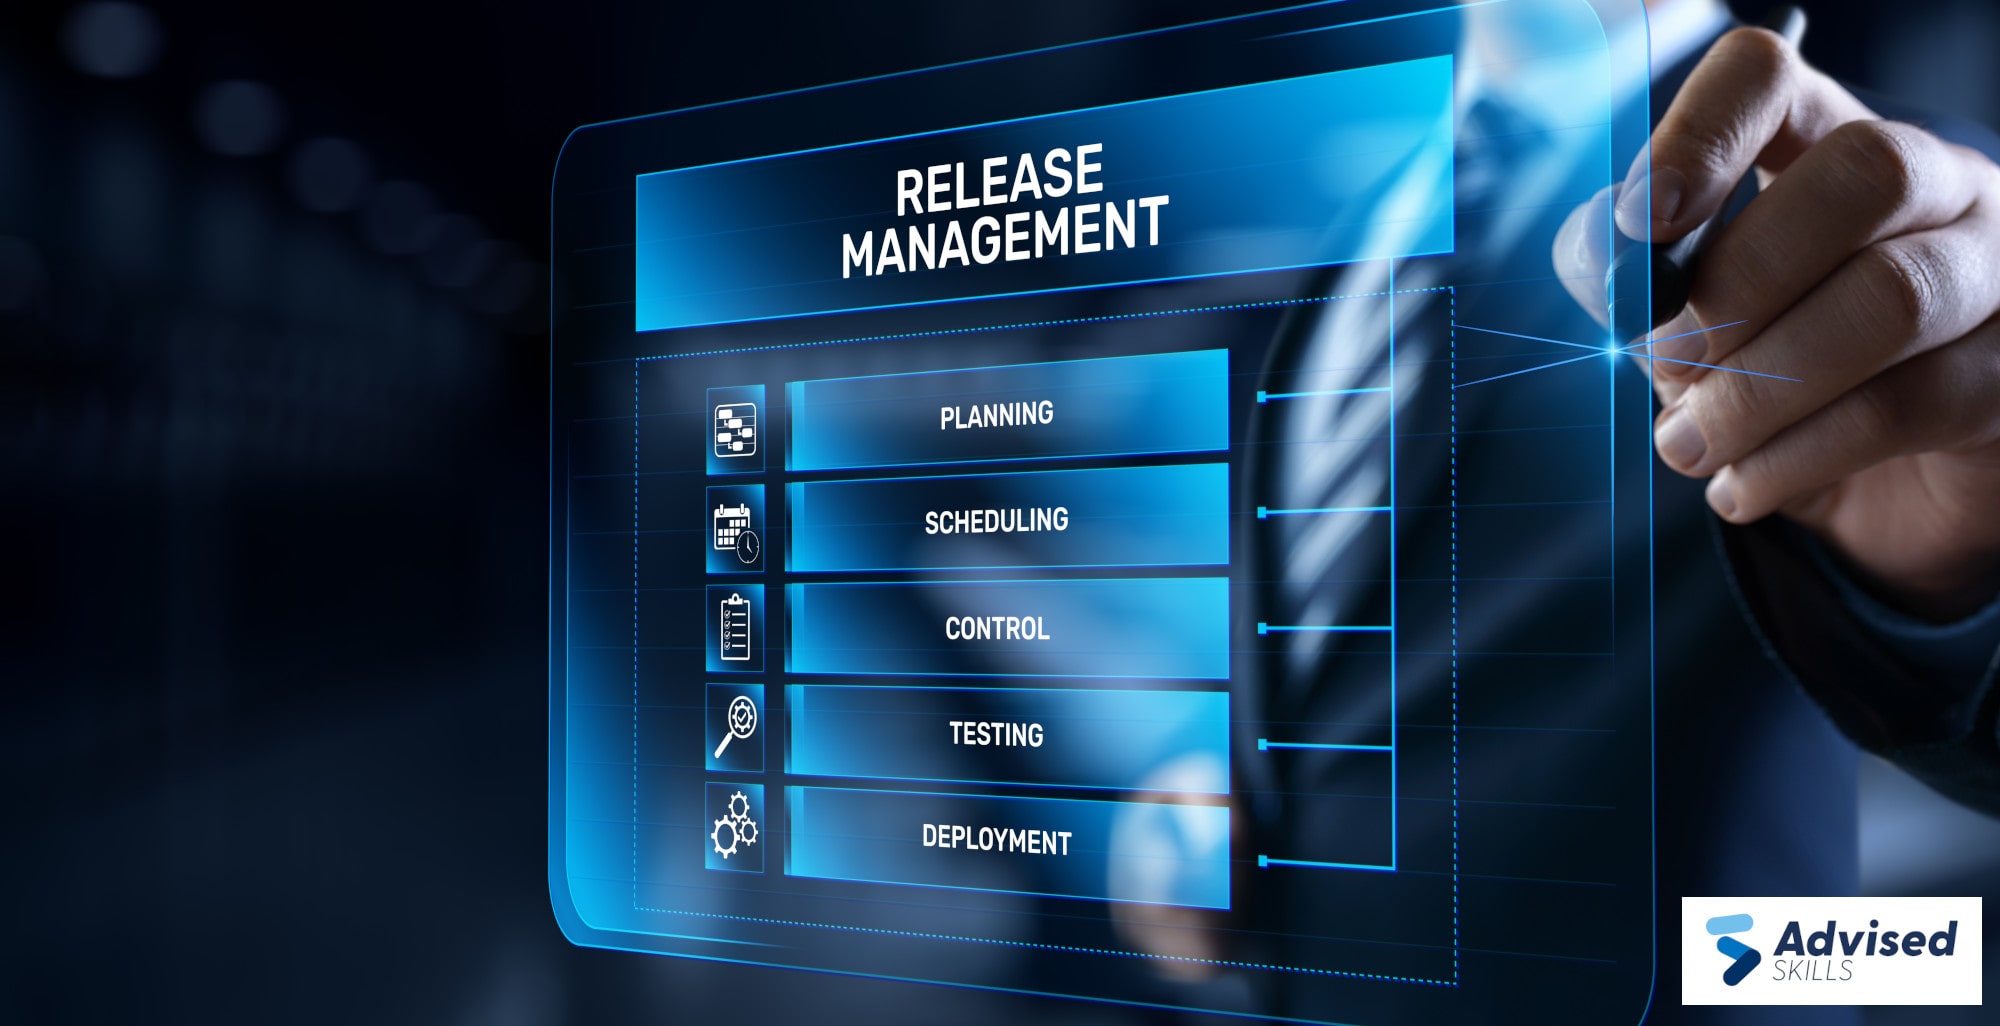 Release Management - Planning, Scheduling, Control, Testing, Deployment